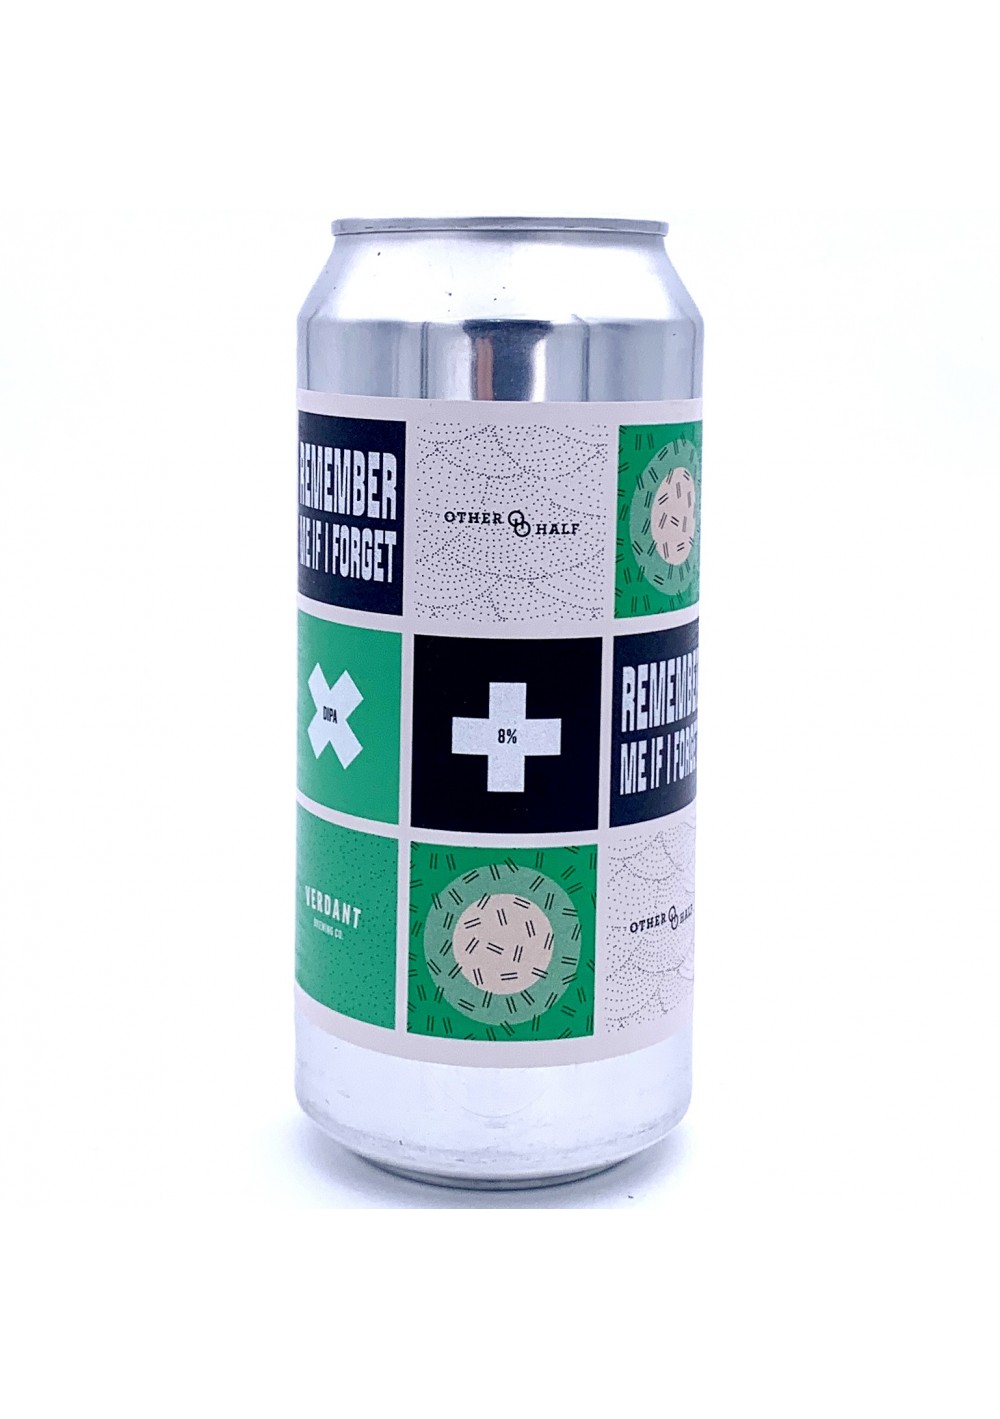 Verdant & Other Half - Remember Me If I Forget - New England DIPA